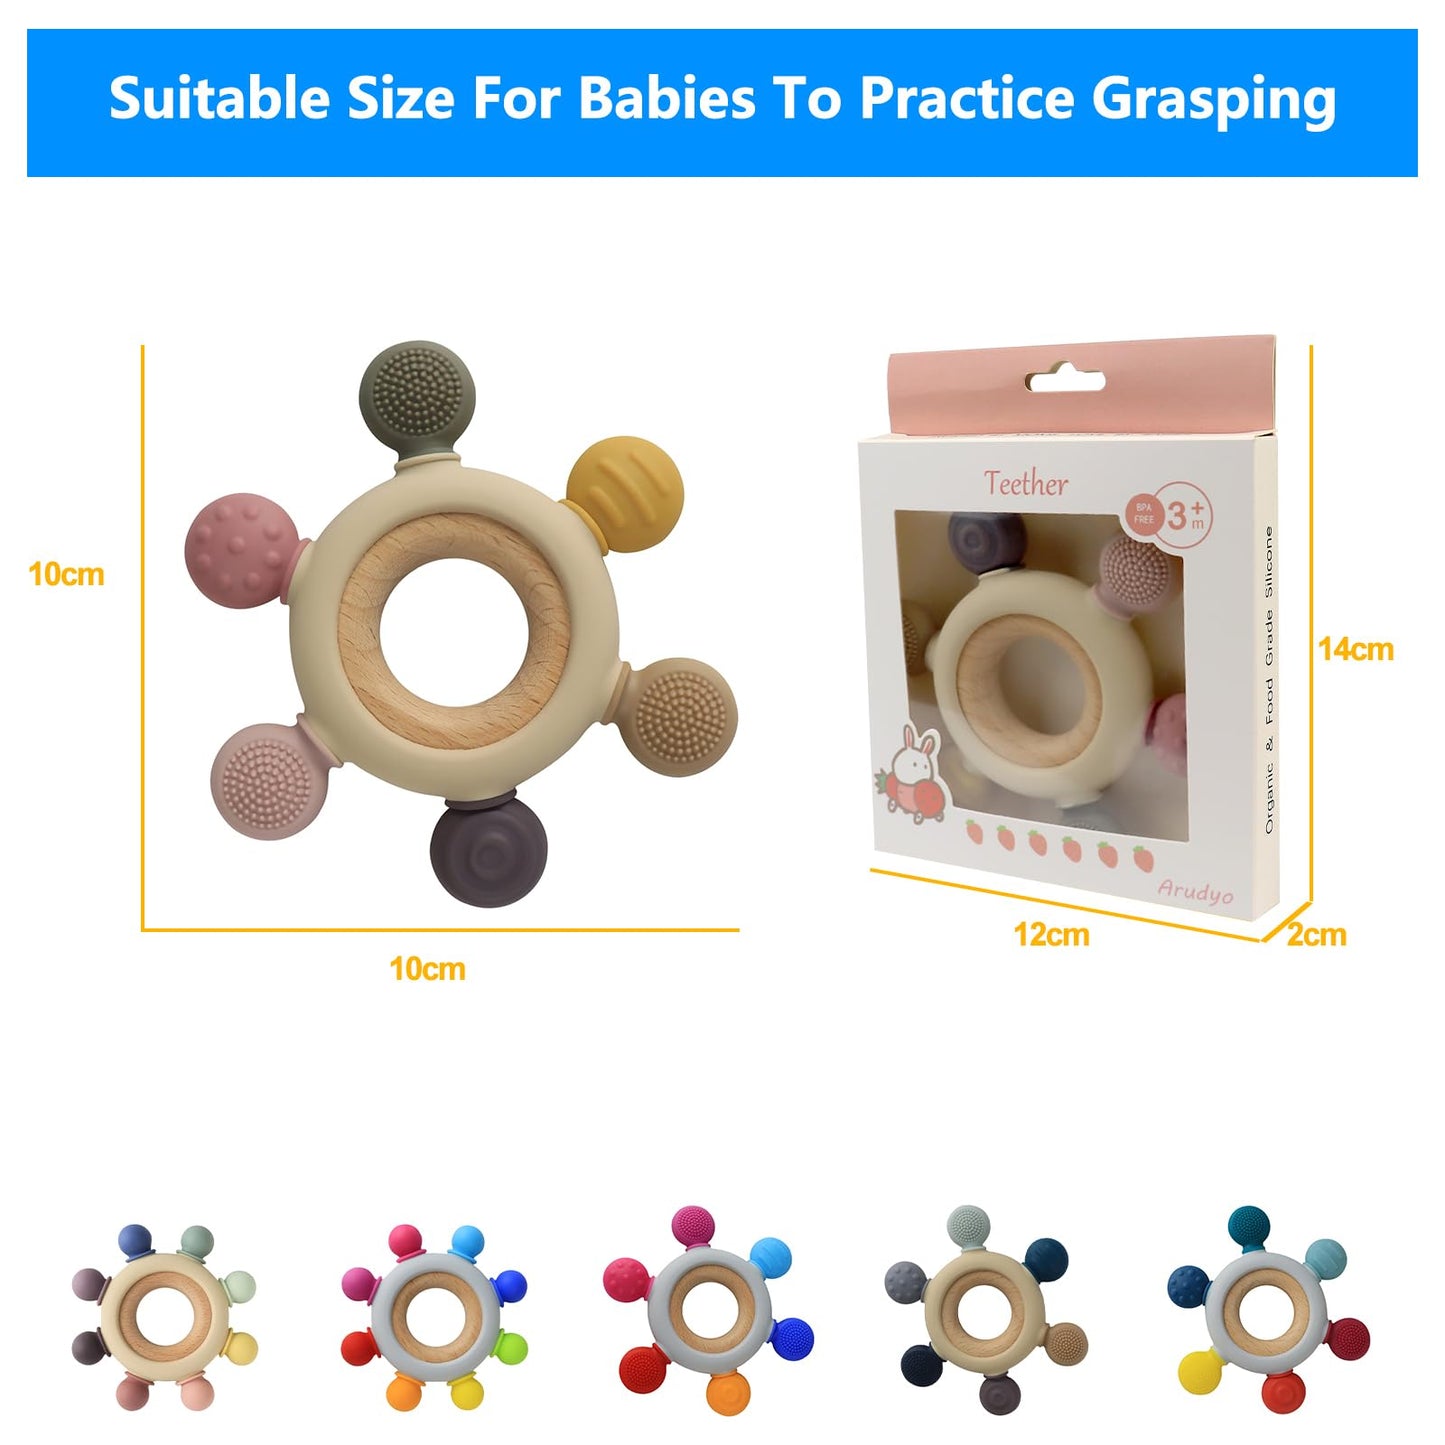 Arudyo Baby Teething Toys Silicone Teethers BPA Free Silicone Rudder with Wooden Ring Soothe Babies Gums (Khaki)